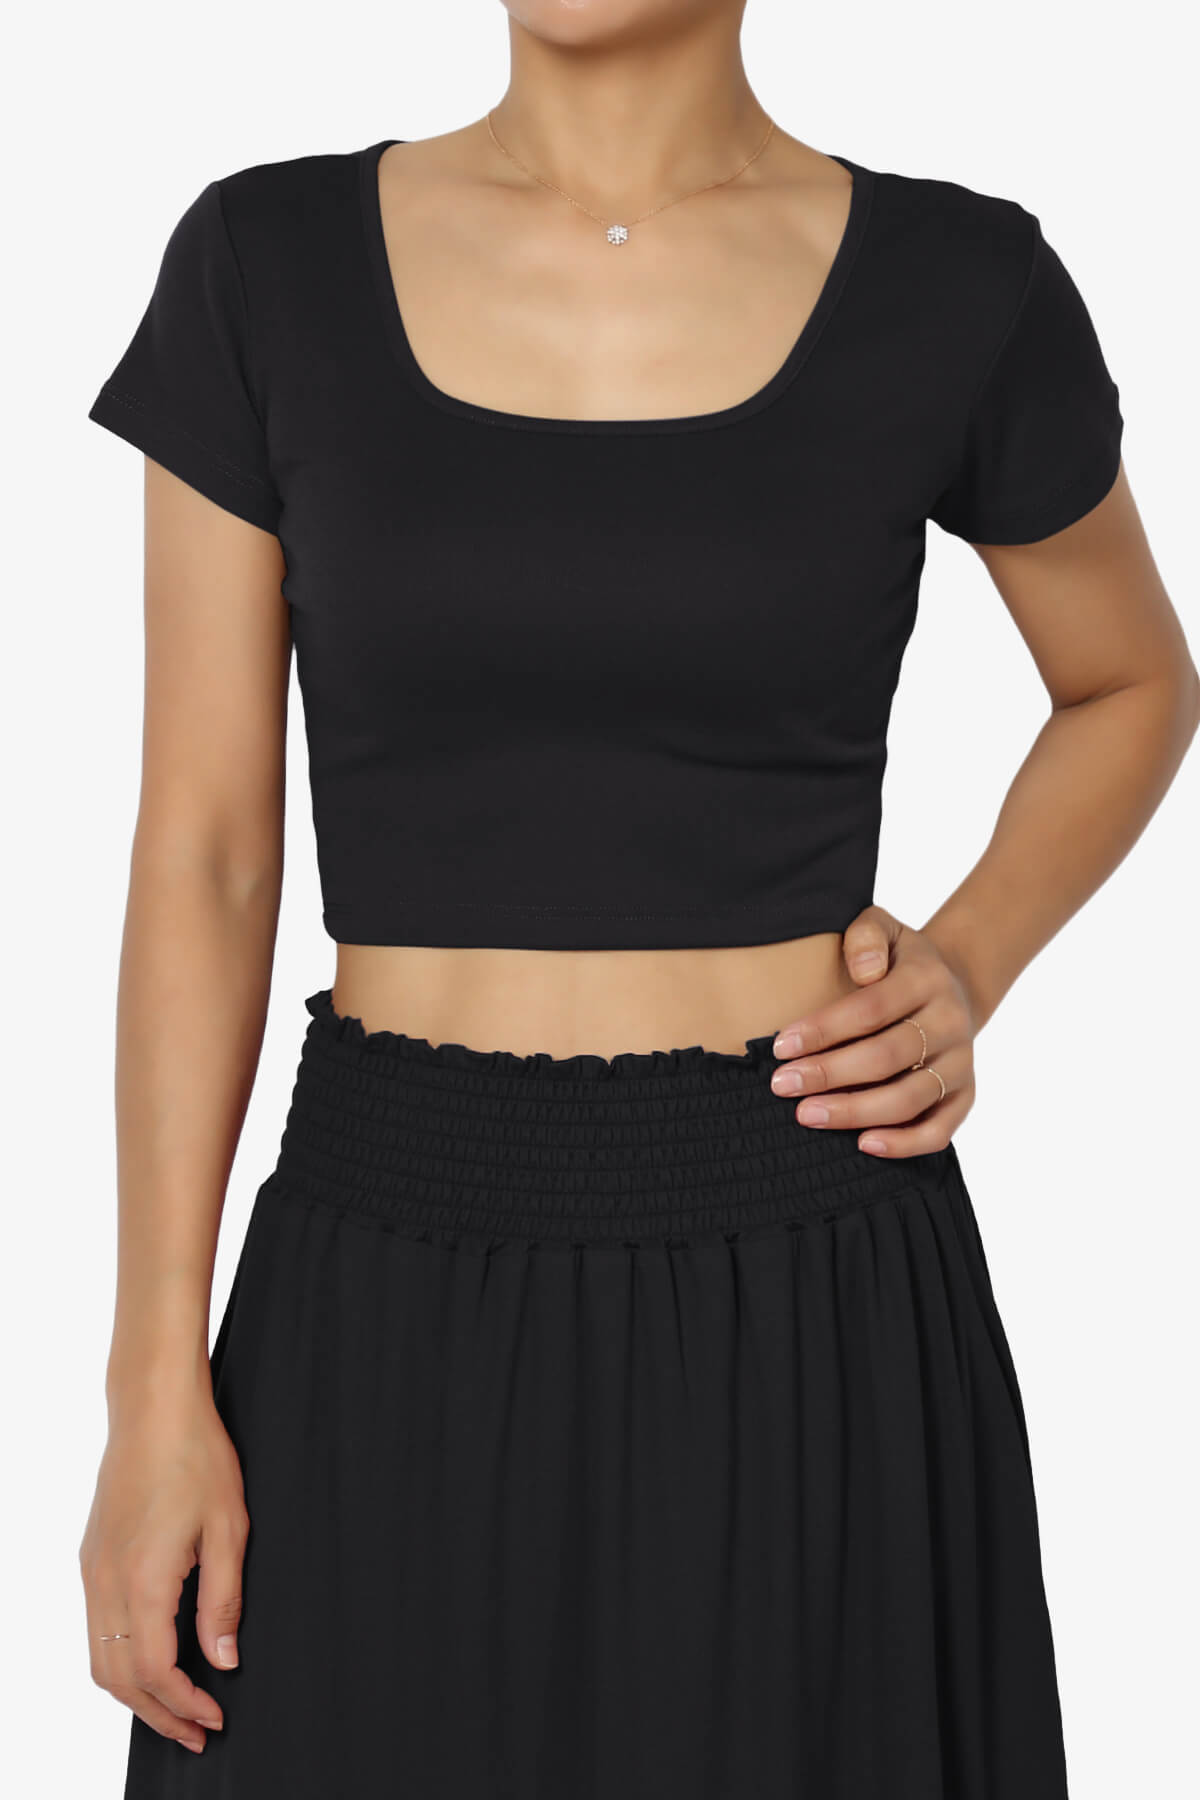 Basic Casual Square Neck Short Sleeve T-Shirt Slim Fit Crop Top